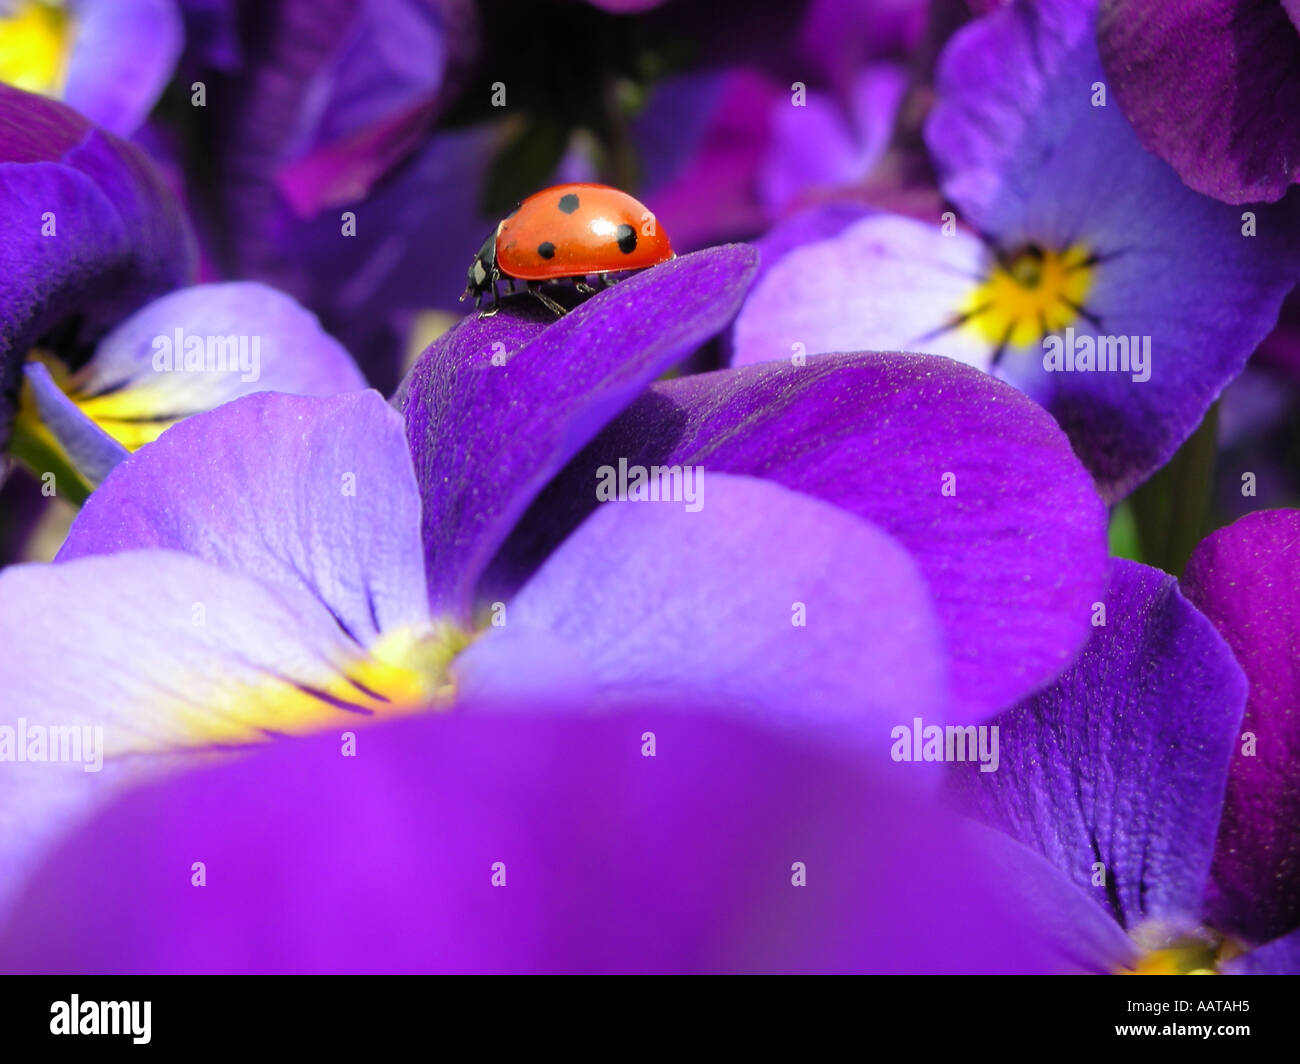 spotted little red ladybird on lilac pansies in domestic garden Stock Photo